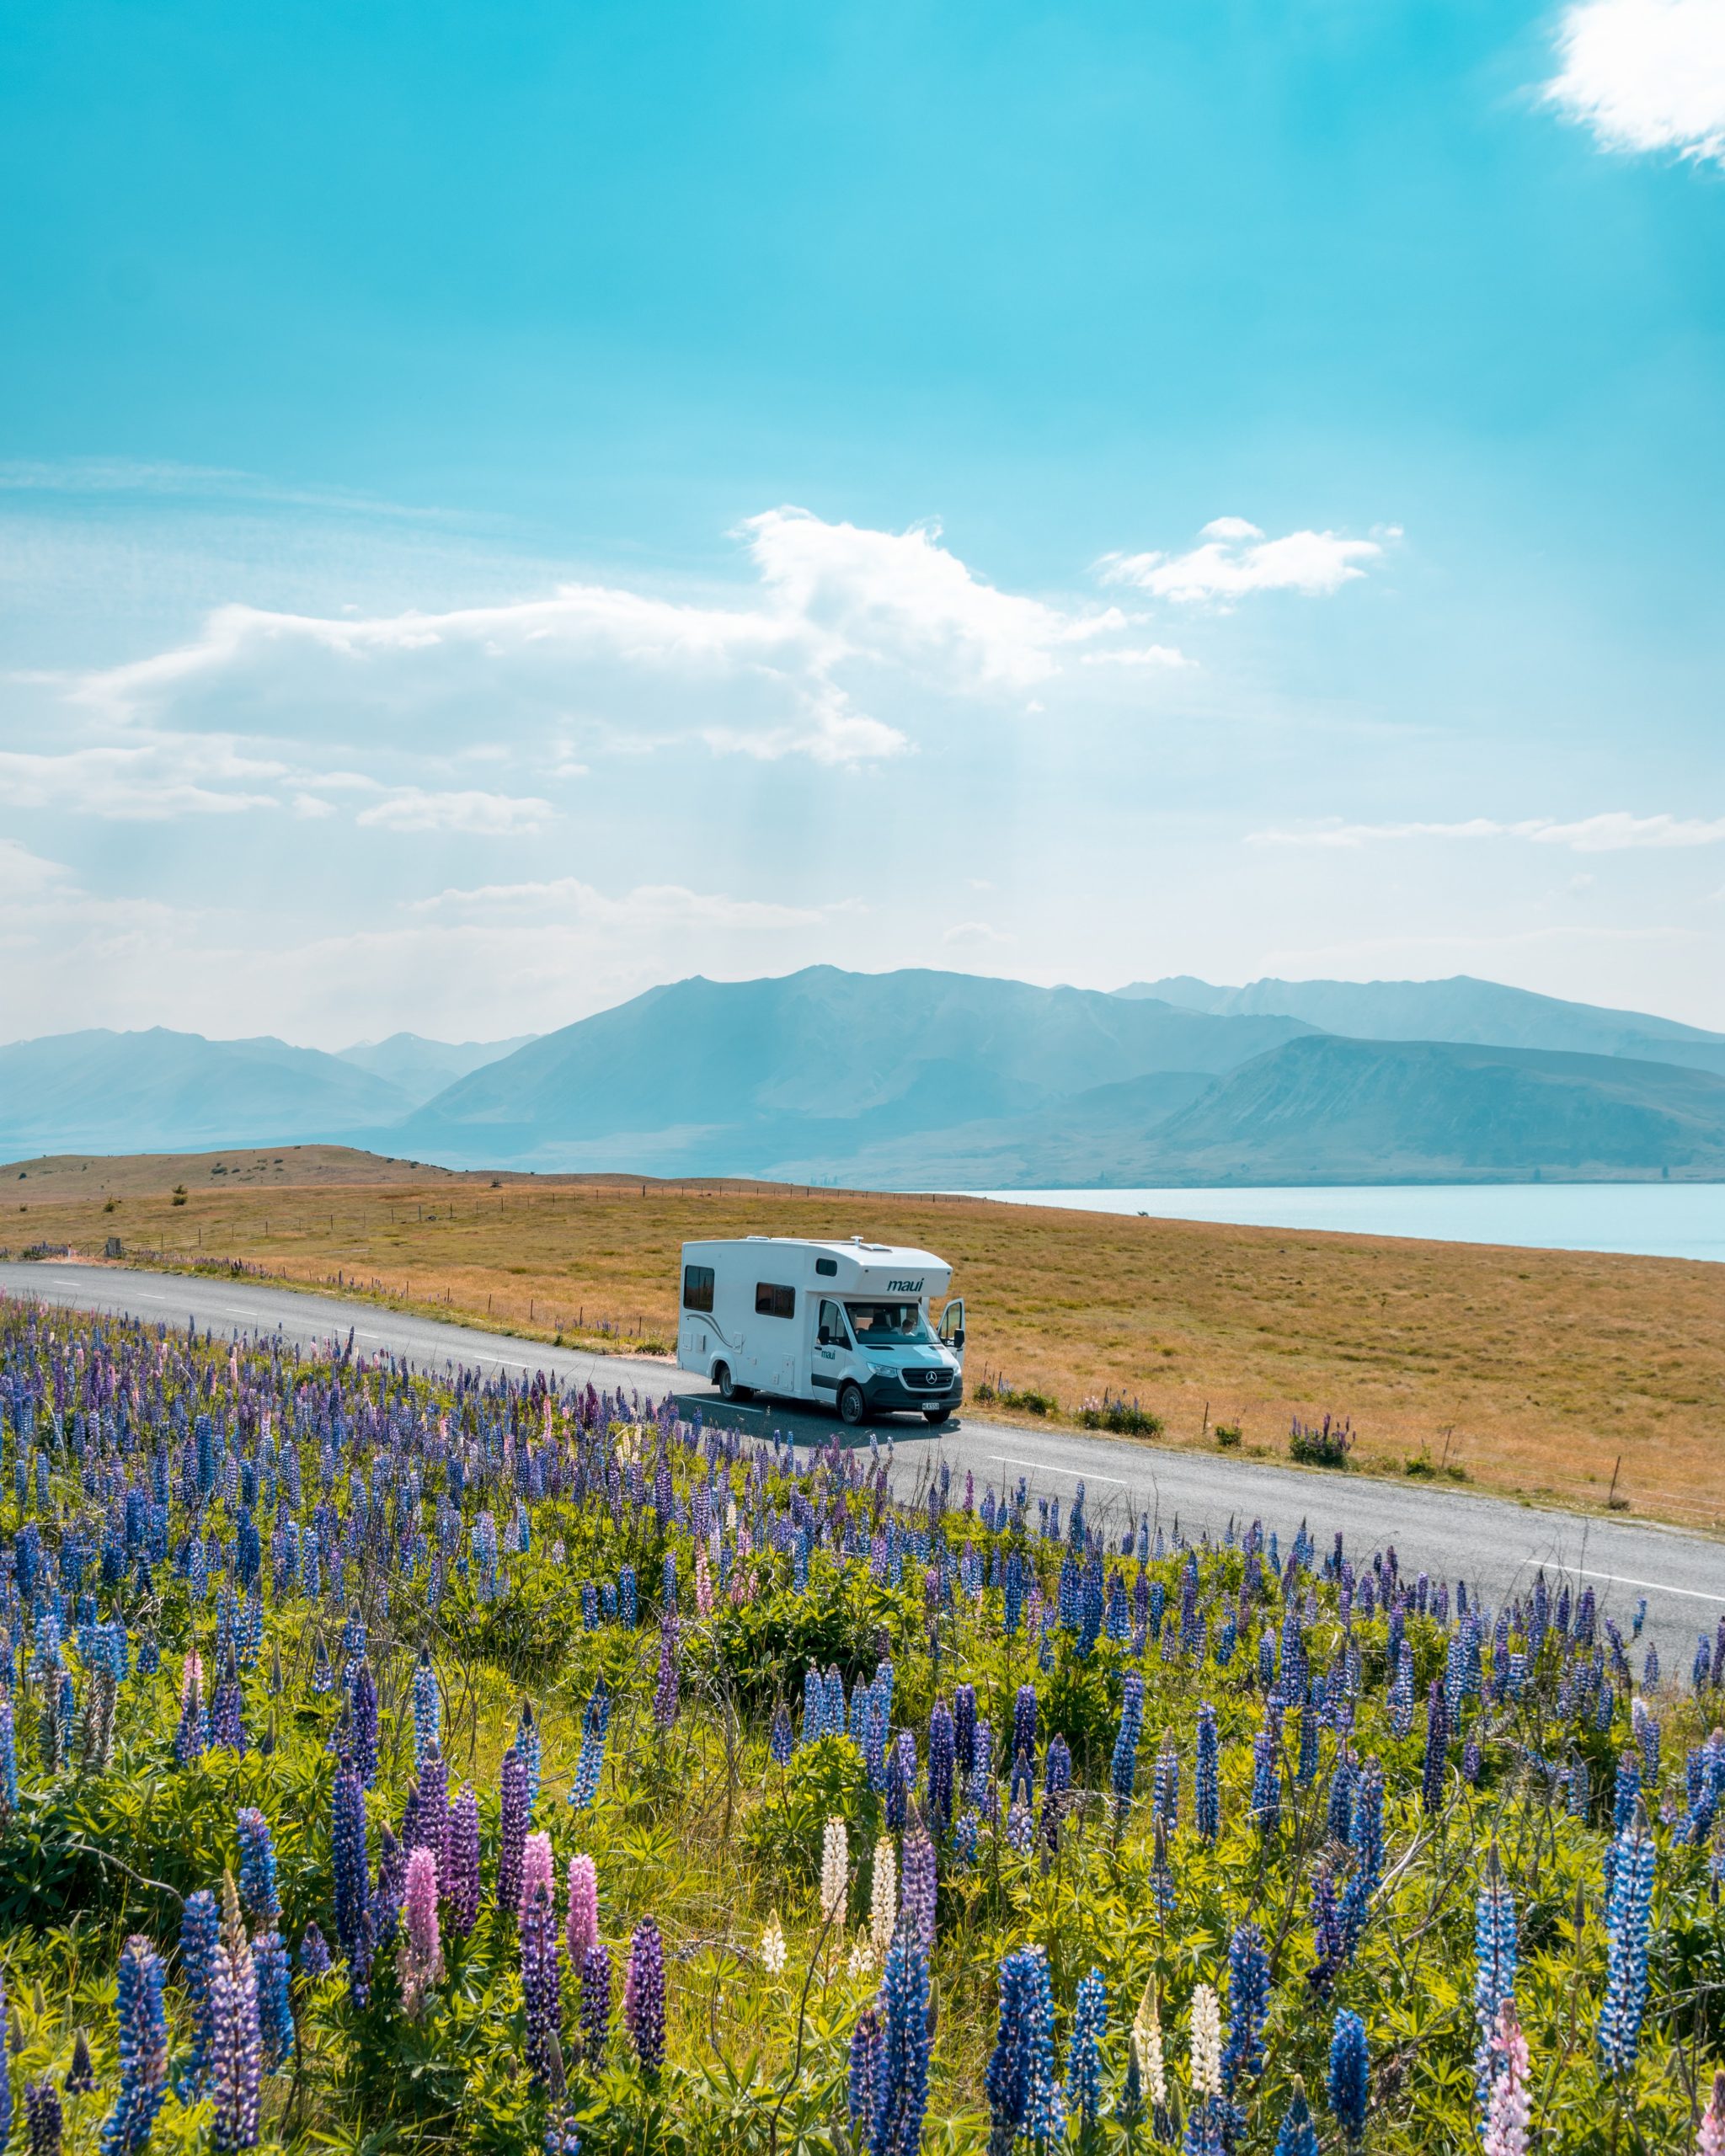 Can you travel around the world in a Camper van?